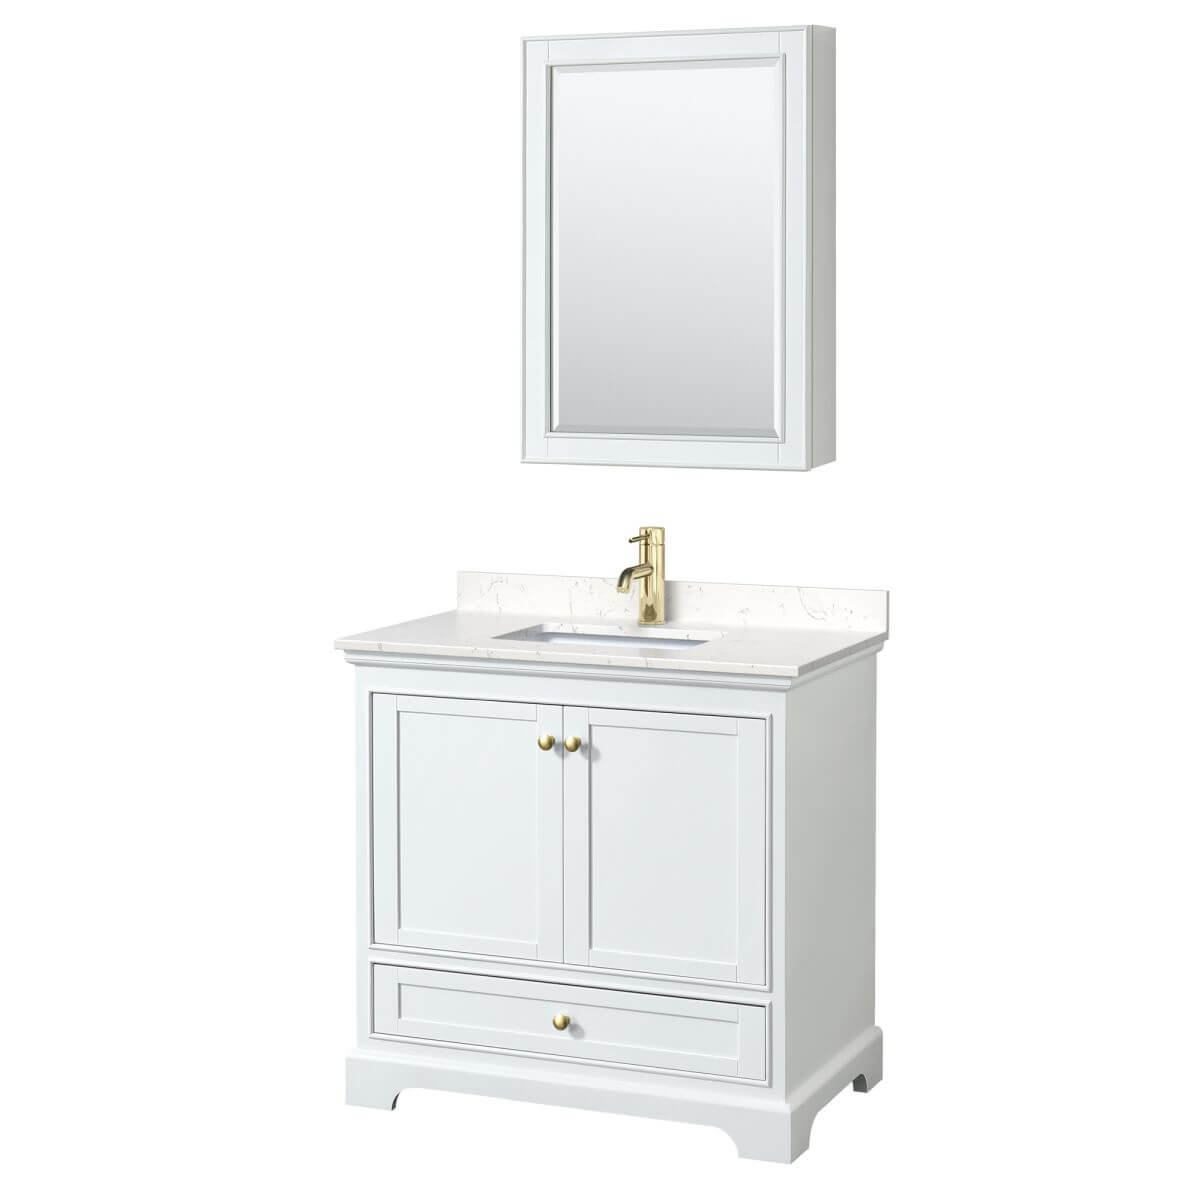 Wyndham Collection Deborah 36 inch Single Bathroom Vanity in White with Carrara Cultured Marble Countertop, Undermount Square Sink, Brushed Gold Trim and Medicine Cabinet - WCS202036SWGC2UNSMED